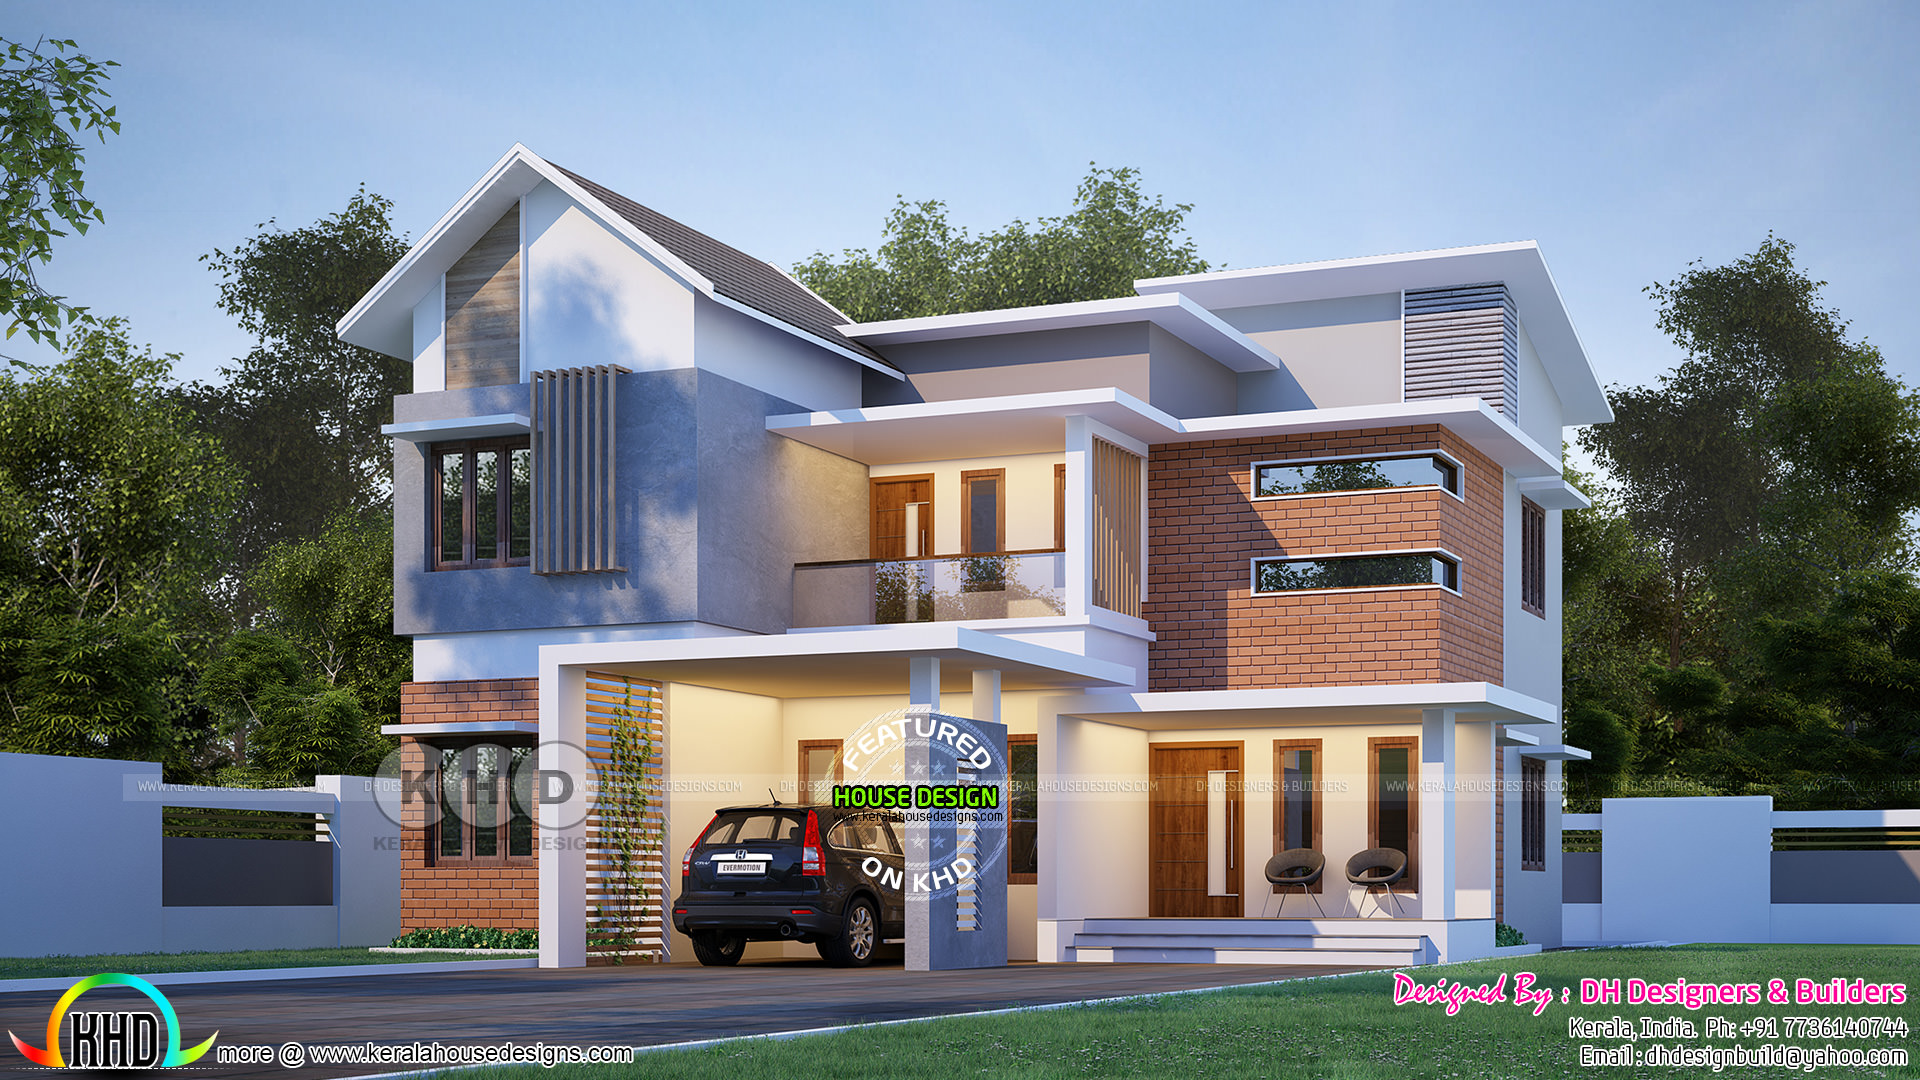 2330 sq-ft 4 bedroom mixed roof modern home - Kerala home design and